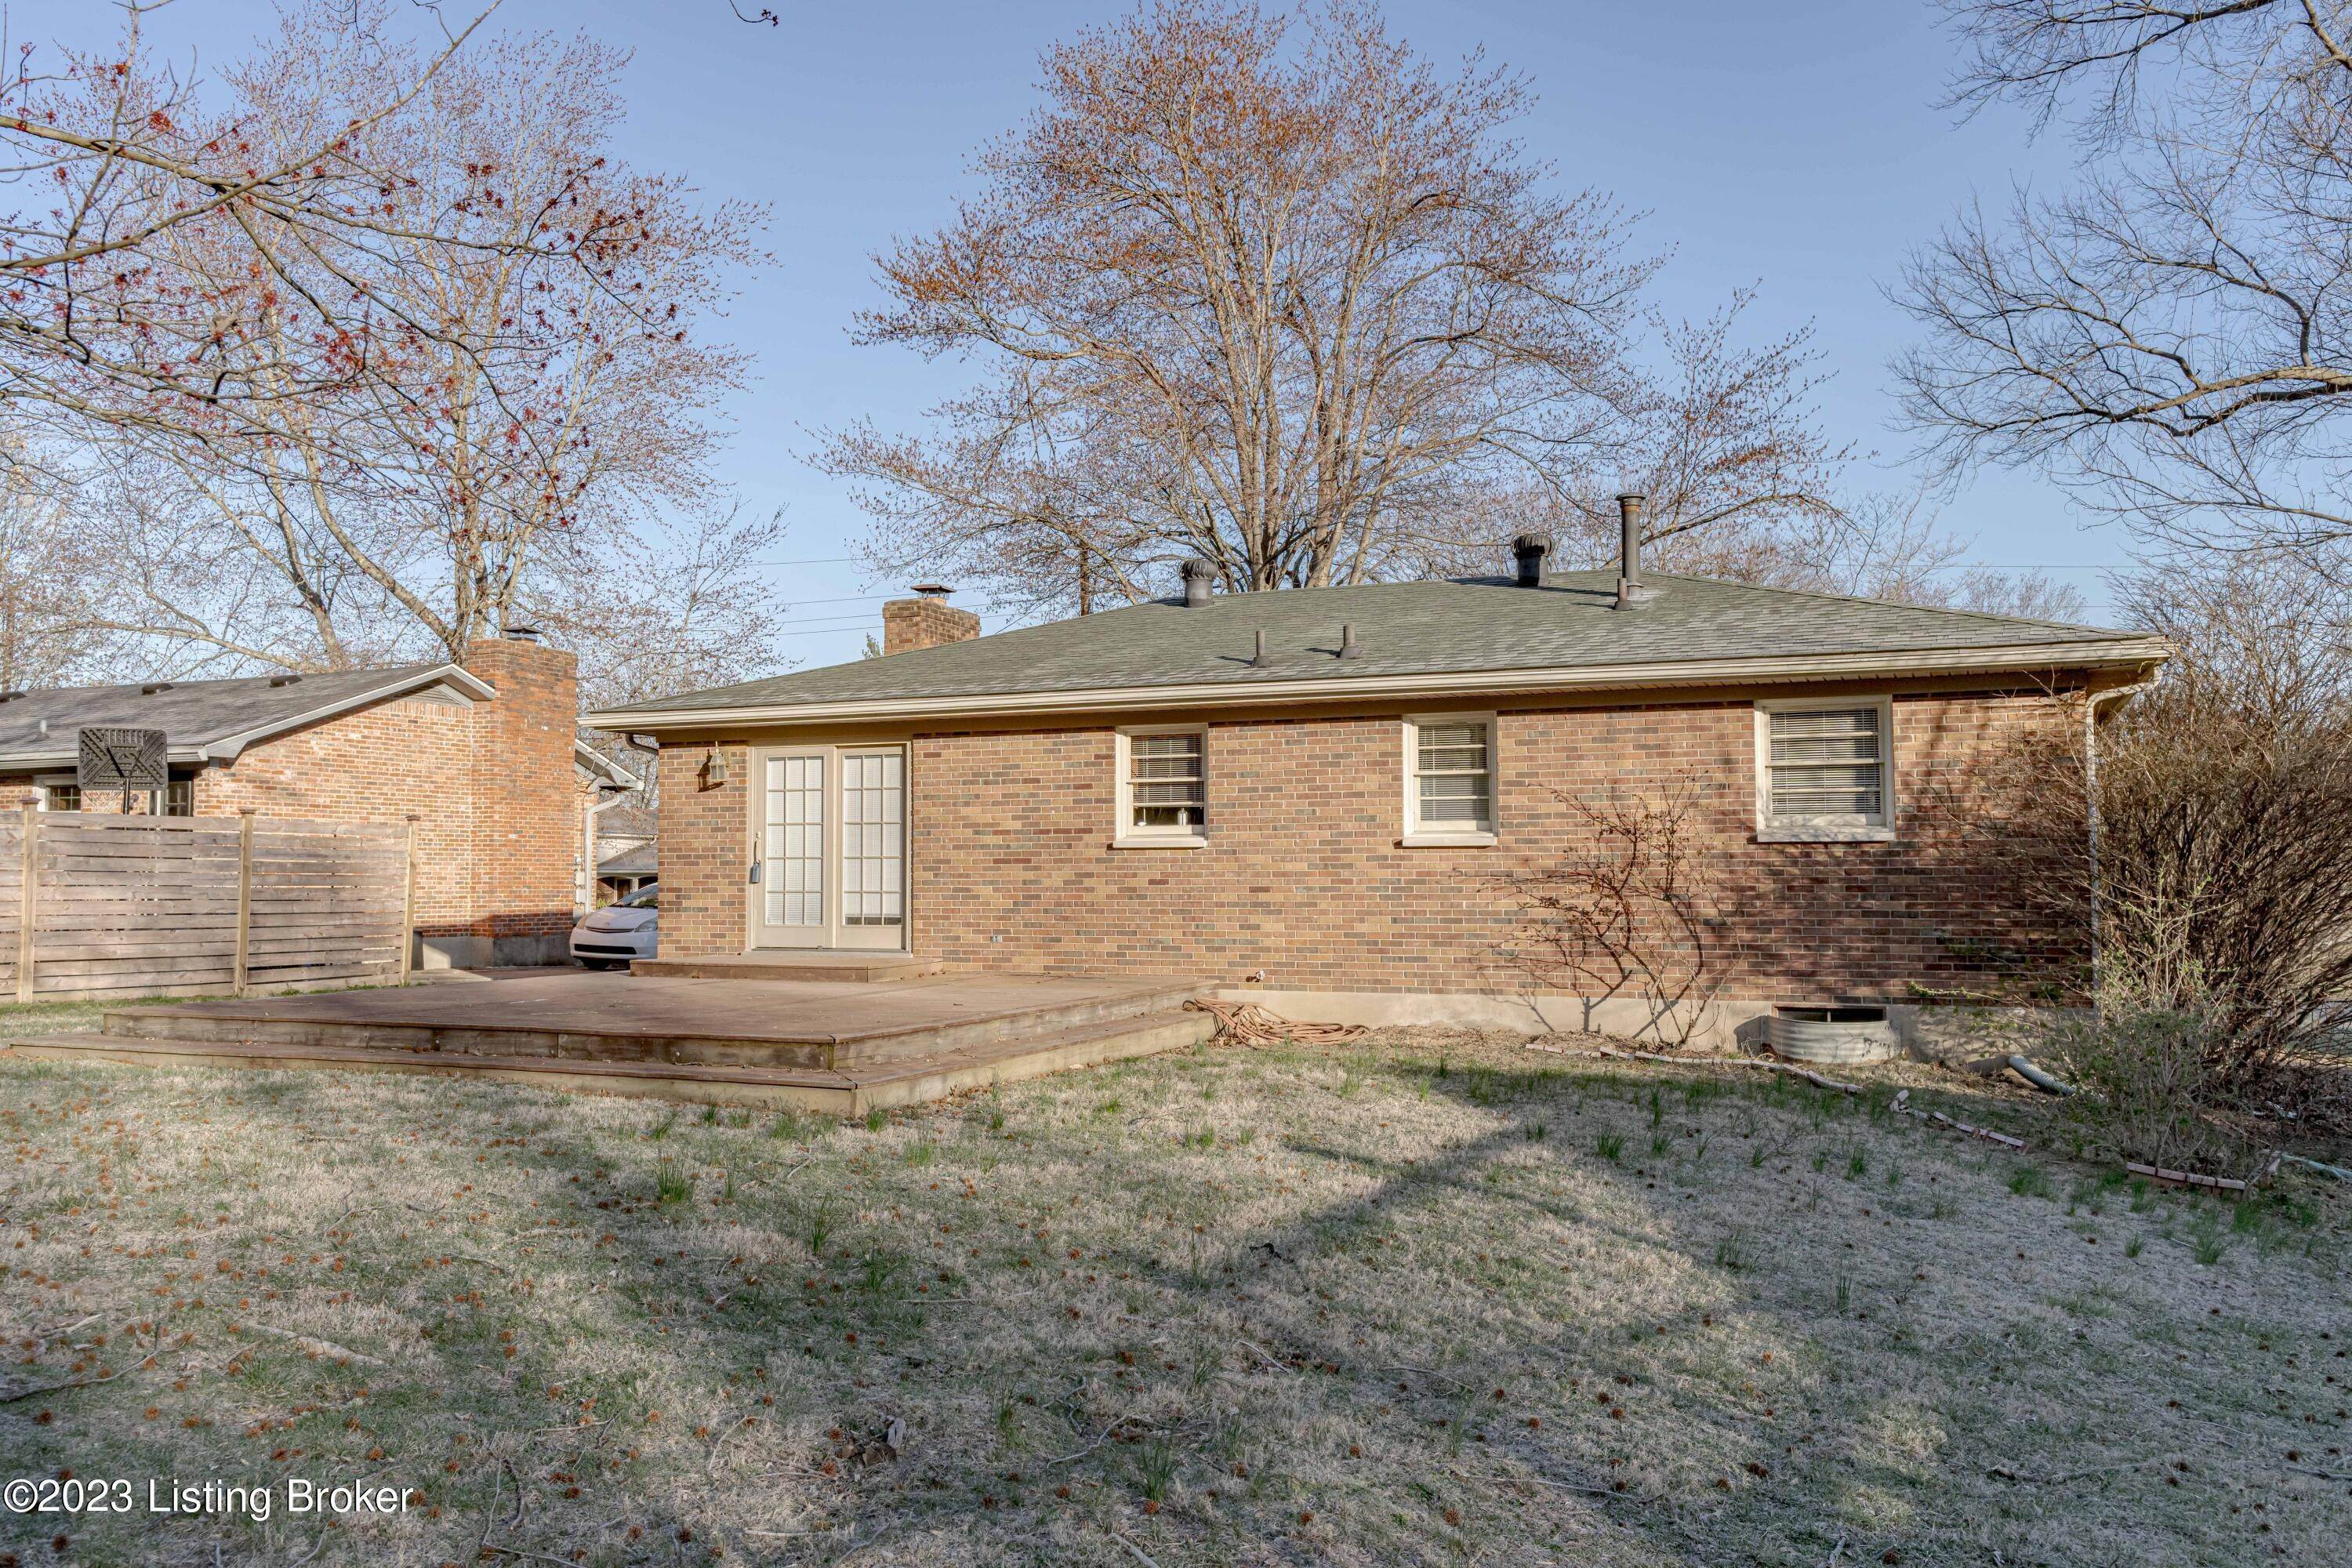 47. Single Family at Louisville, KY 40214